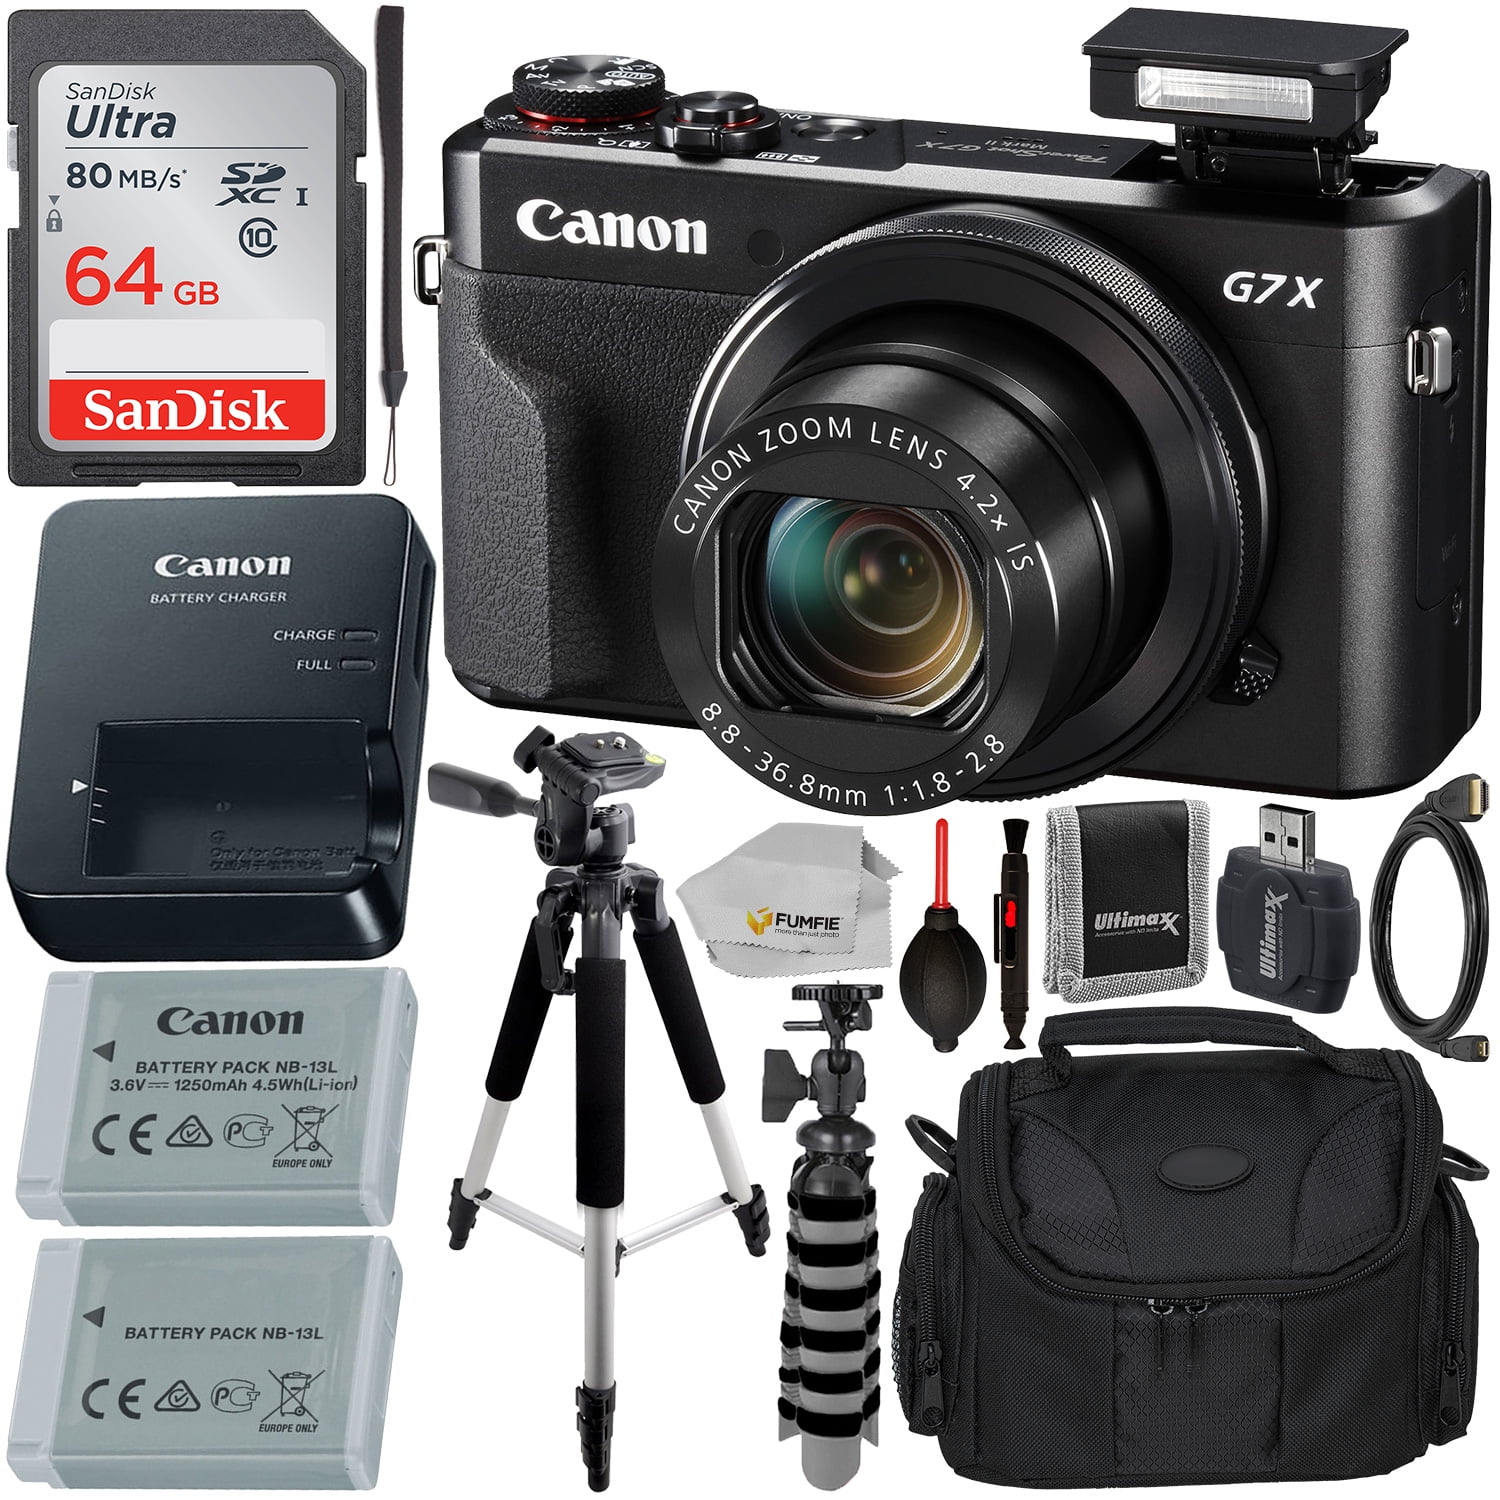 Canon PowerShot G7 X Mark II Digital Camera (Black) with Essential  Accessory Bundle Includes: SanDisk Ultra 64GB SDXC Memory Card, Extended  Life Replacement Battery, Tripod, Carrying Case  More